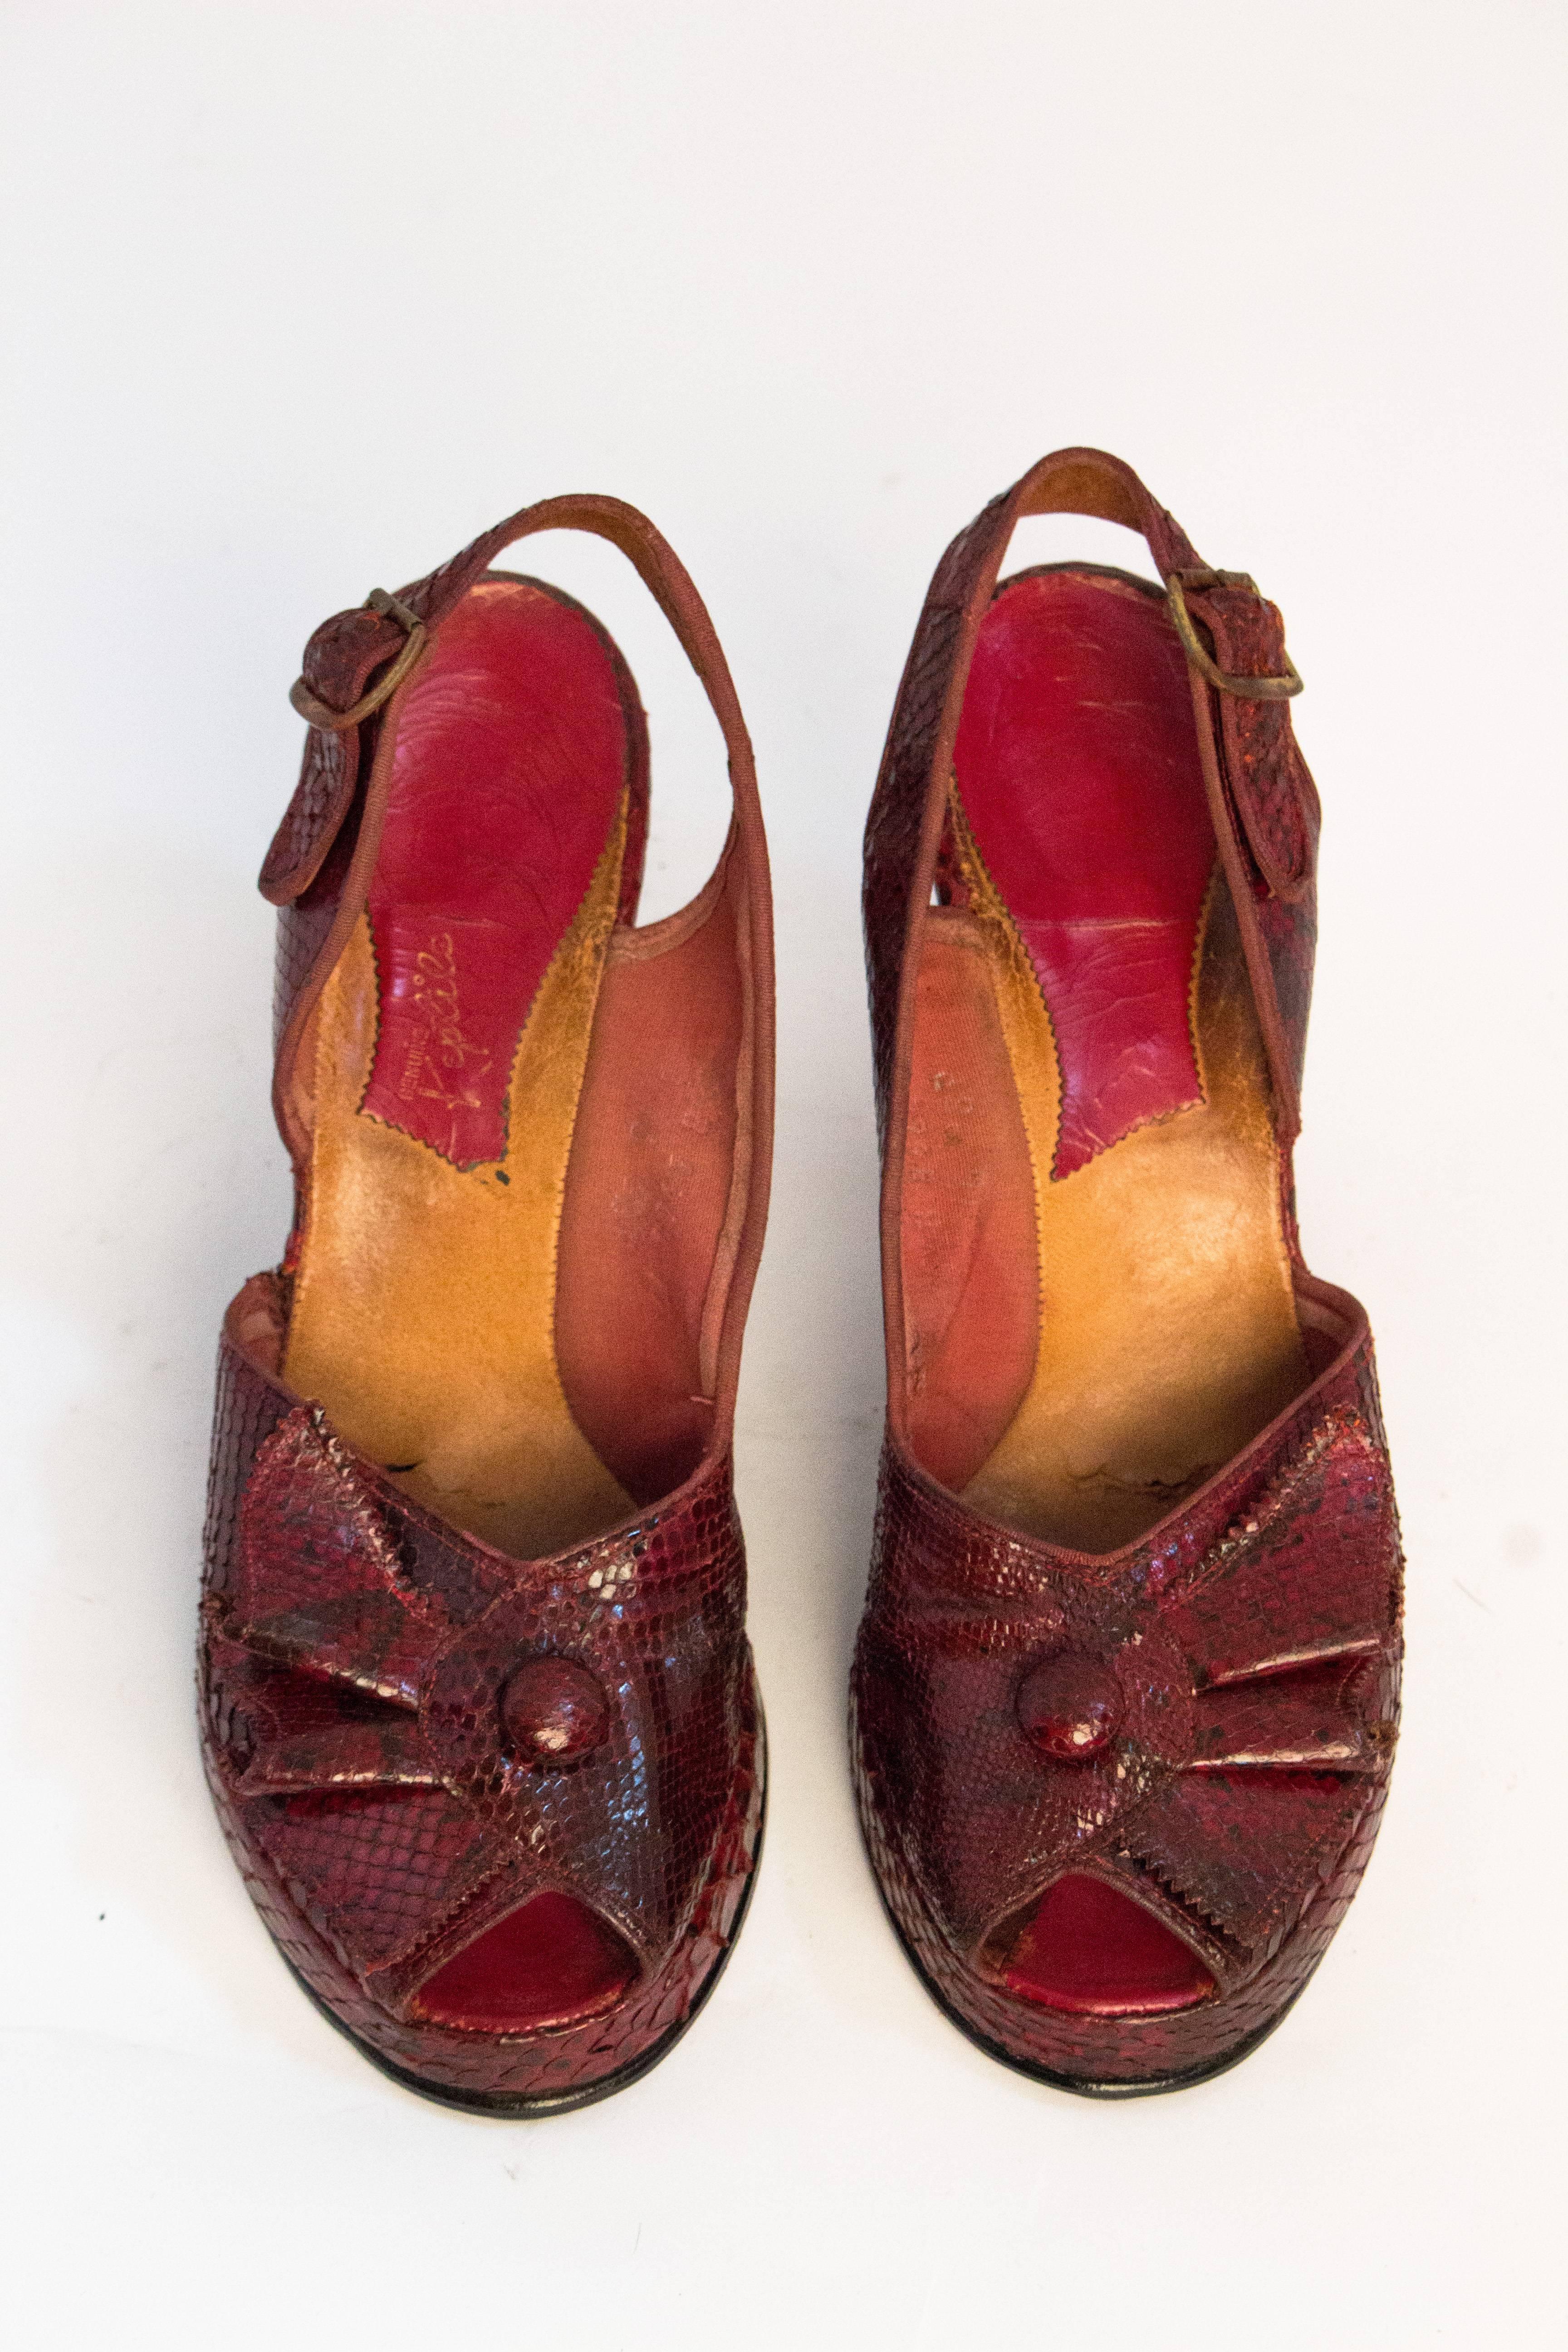 40s red snakeskin platforms with peep toe. Ruffled toe top embellishment. 

Measurements:
Insole: 9 1/2